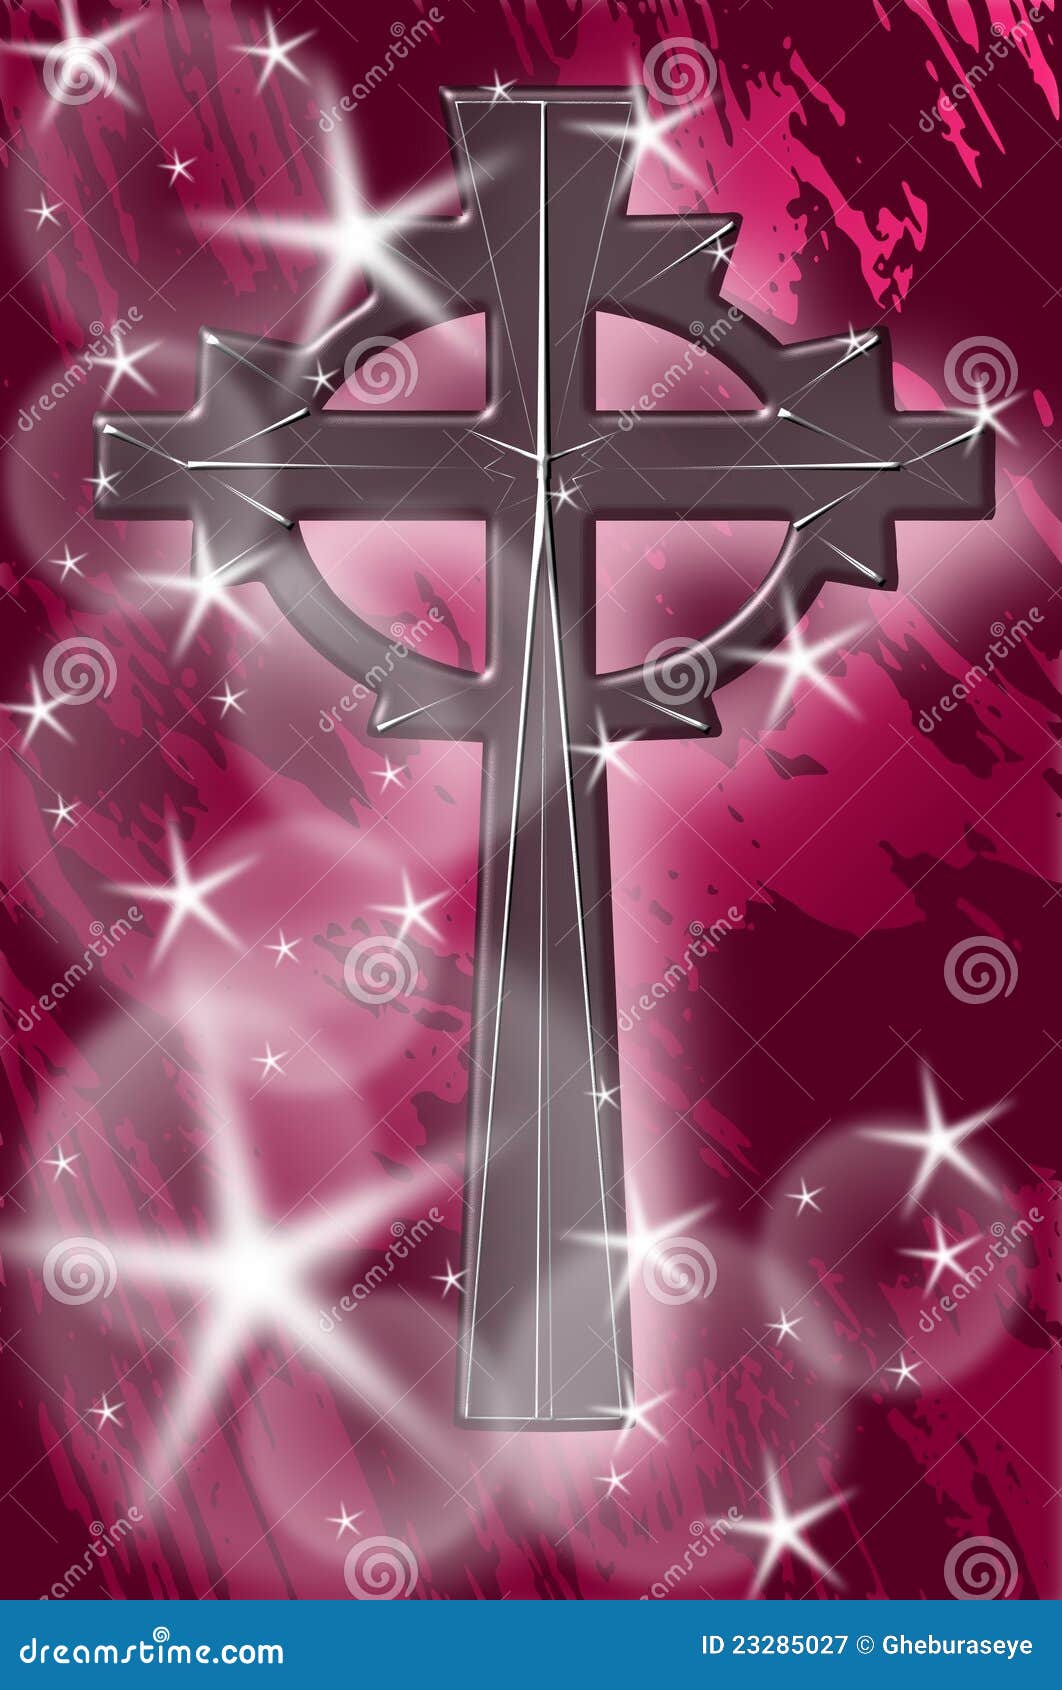 Download A pink cross symbolizing peace and tranquility Wallpaper   Wallpaperscom